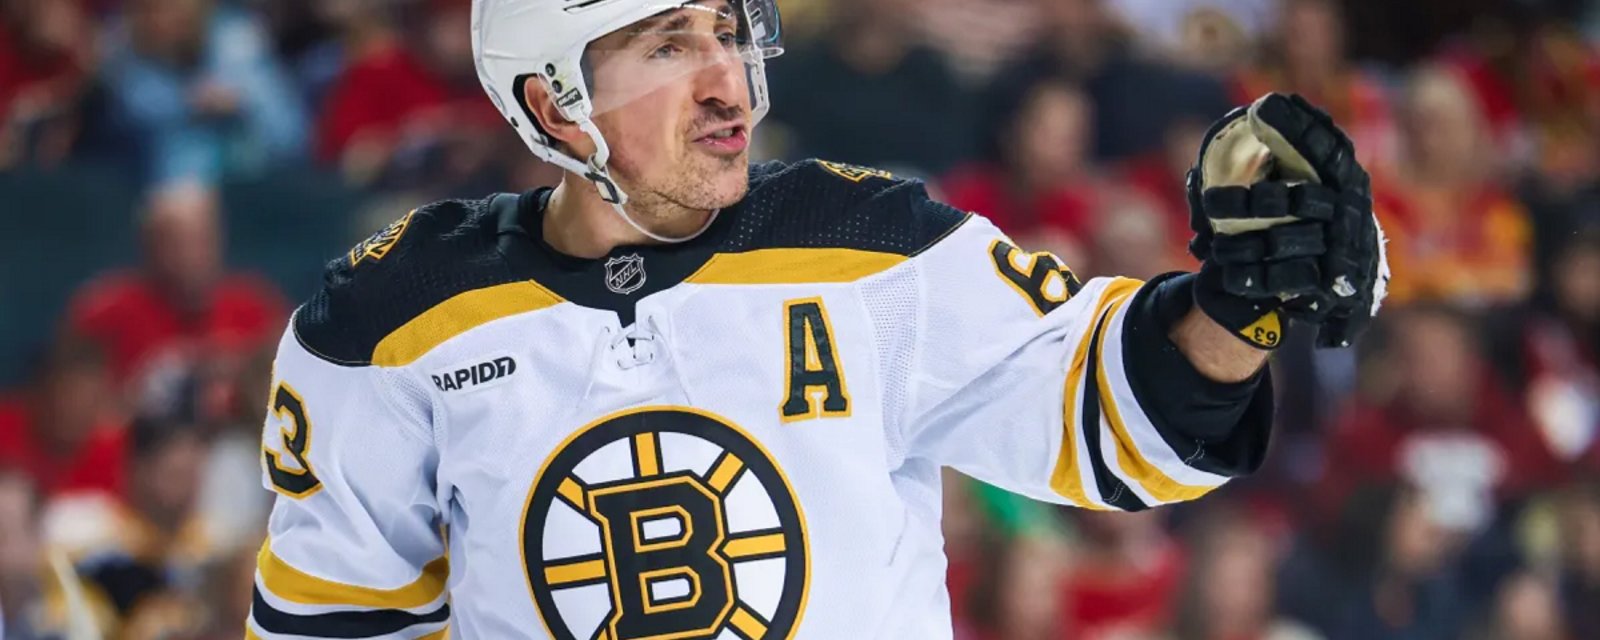 Brad Marchand dethroned as the NHL's most hated player.